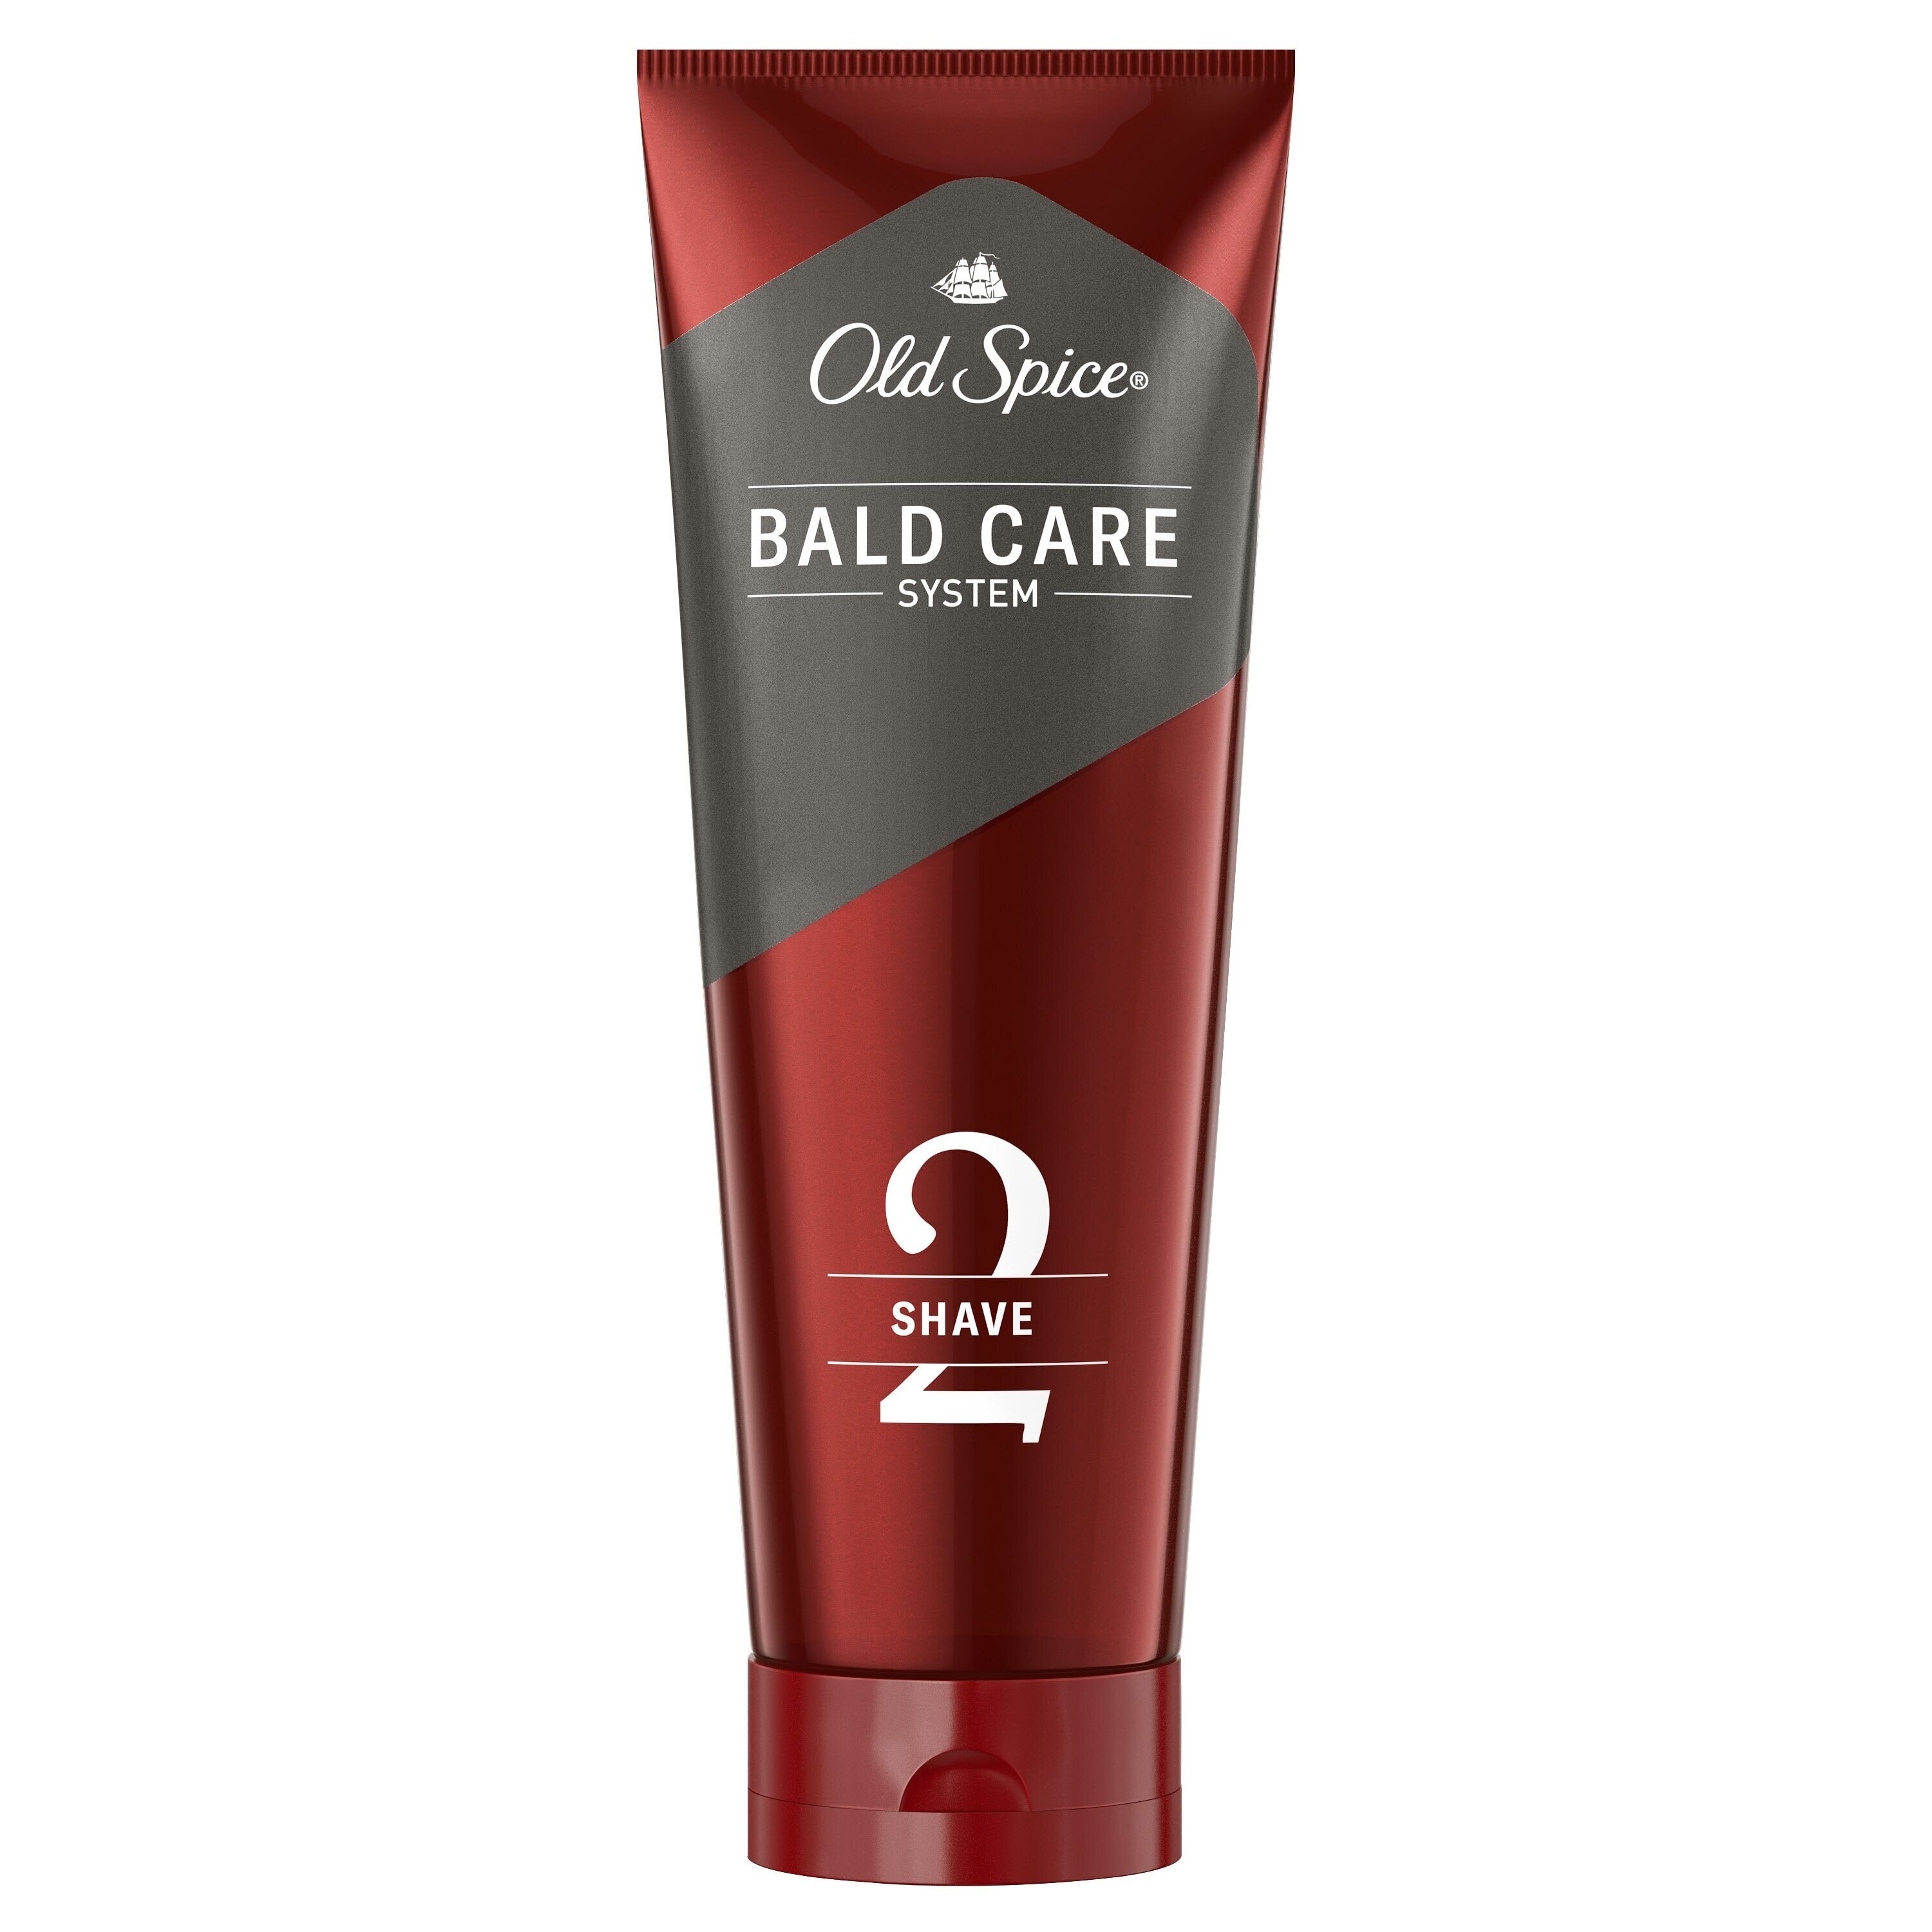 Old Spice Bald Care System Lather-less Shave Cream, 10.9 OZ